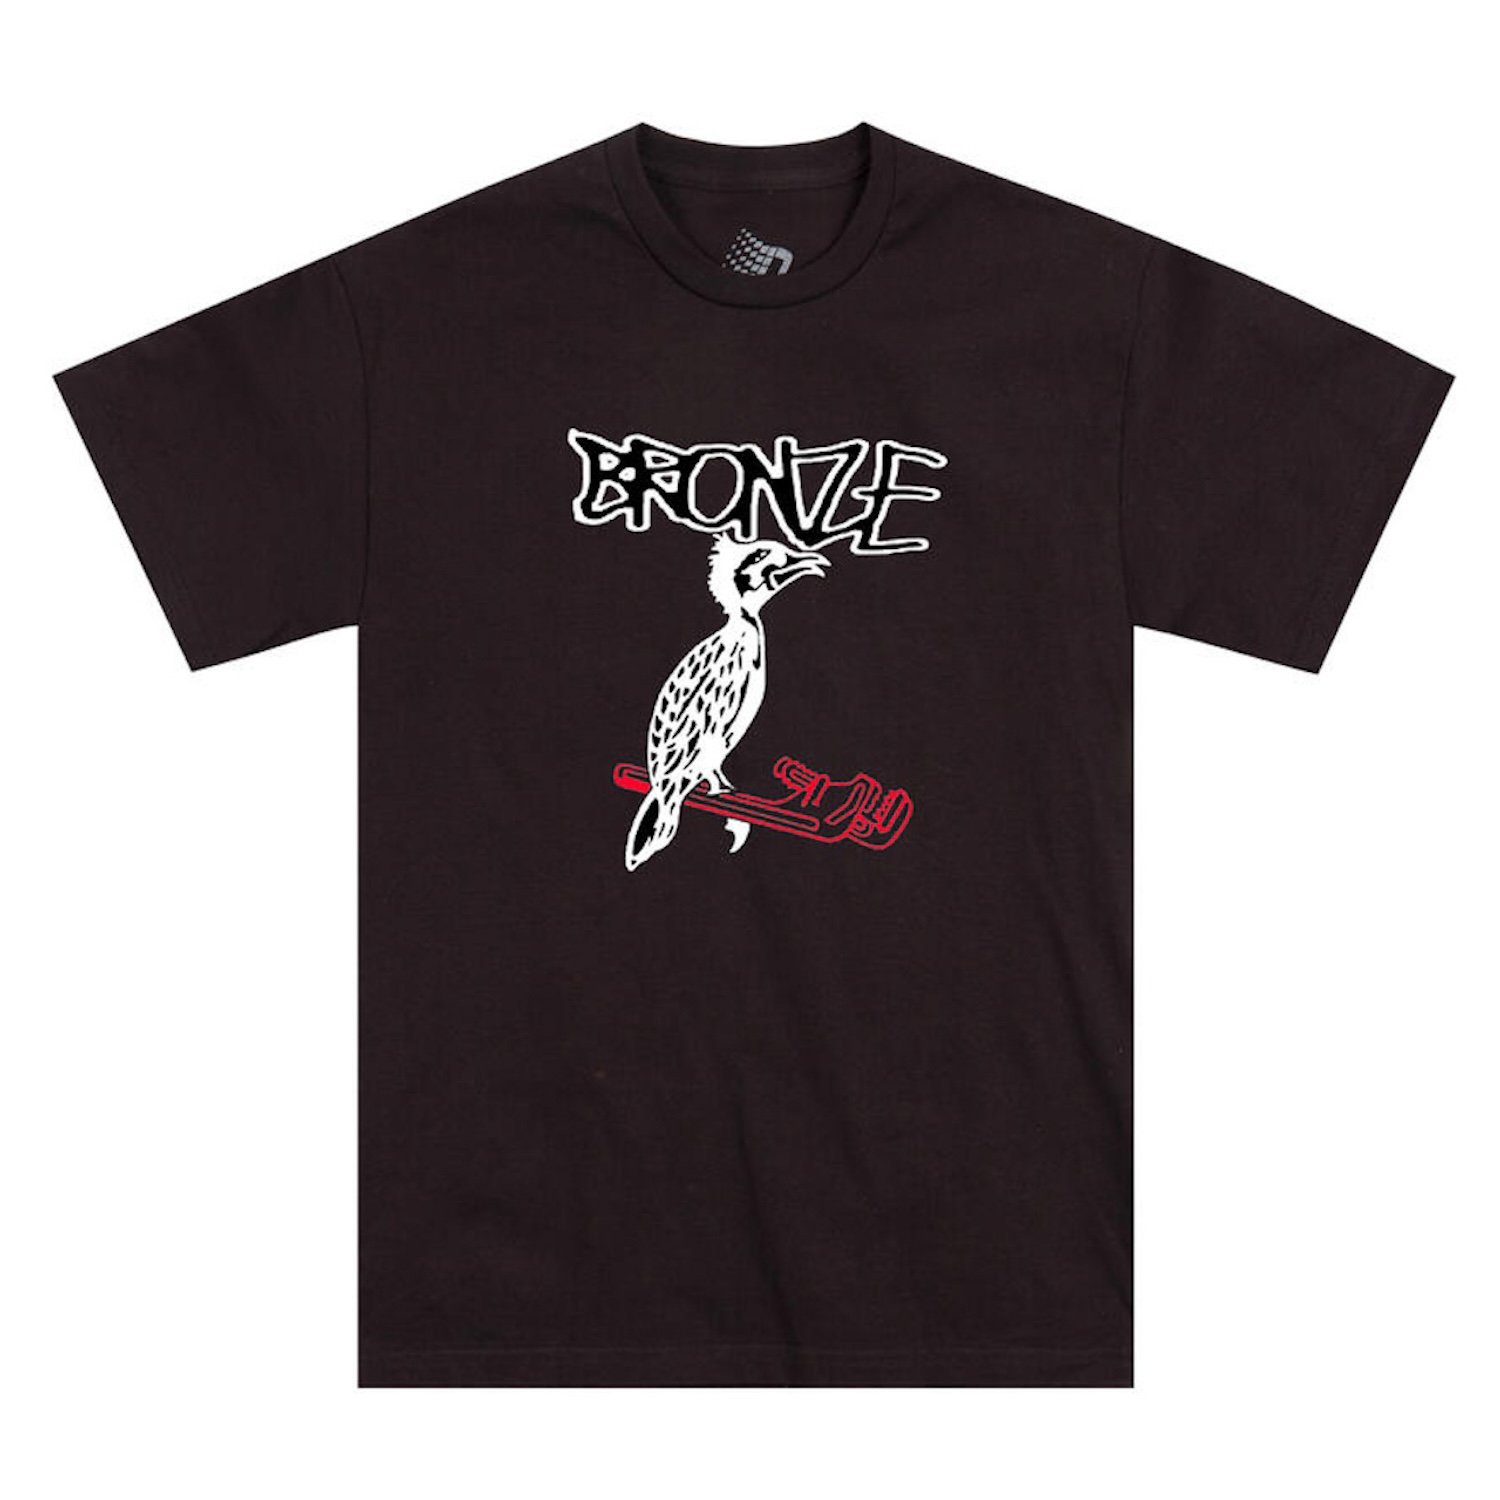 BRONZE56K<br>WRENCH TEE<br>